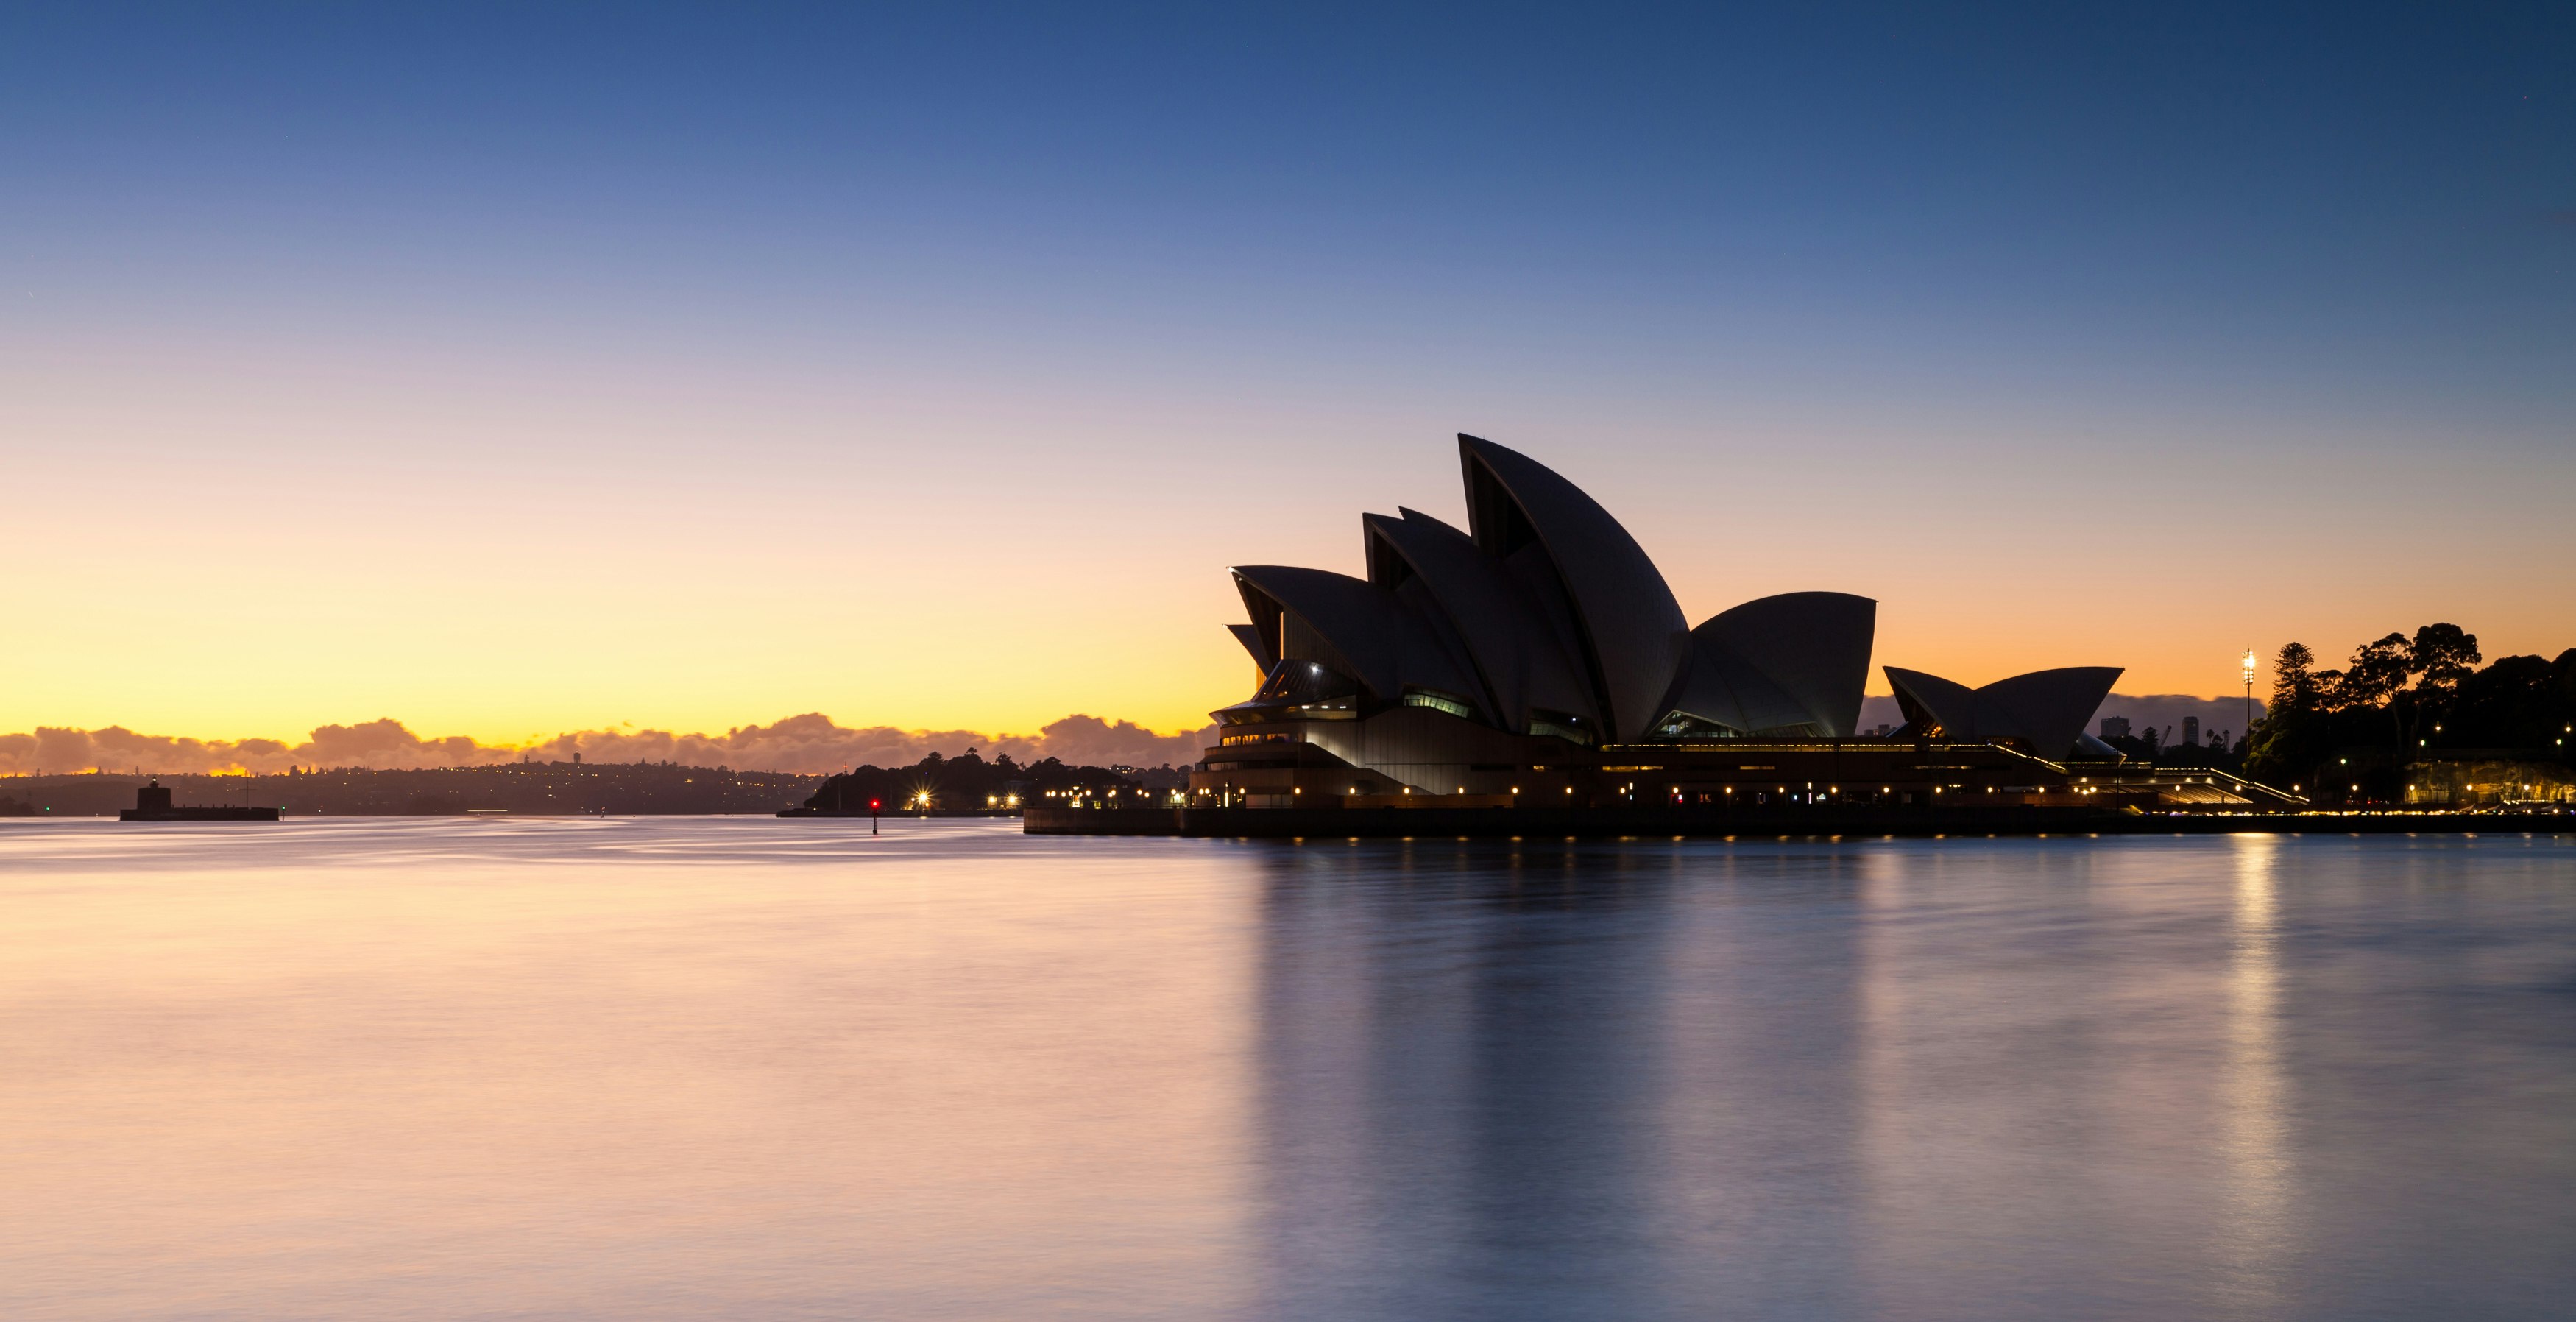 sydney opera house near body of water during sunset